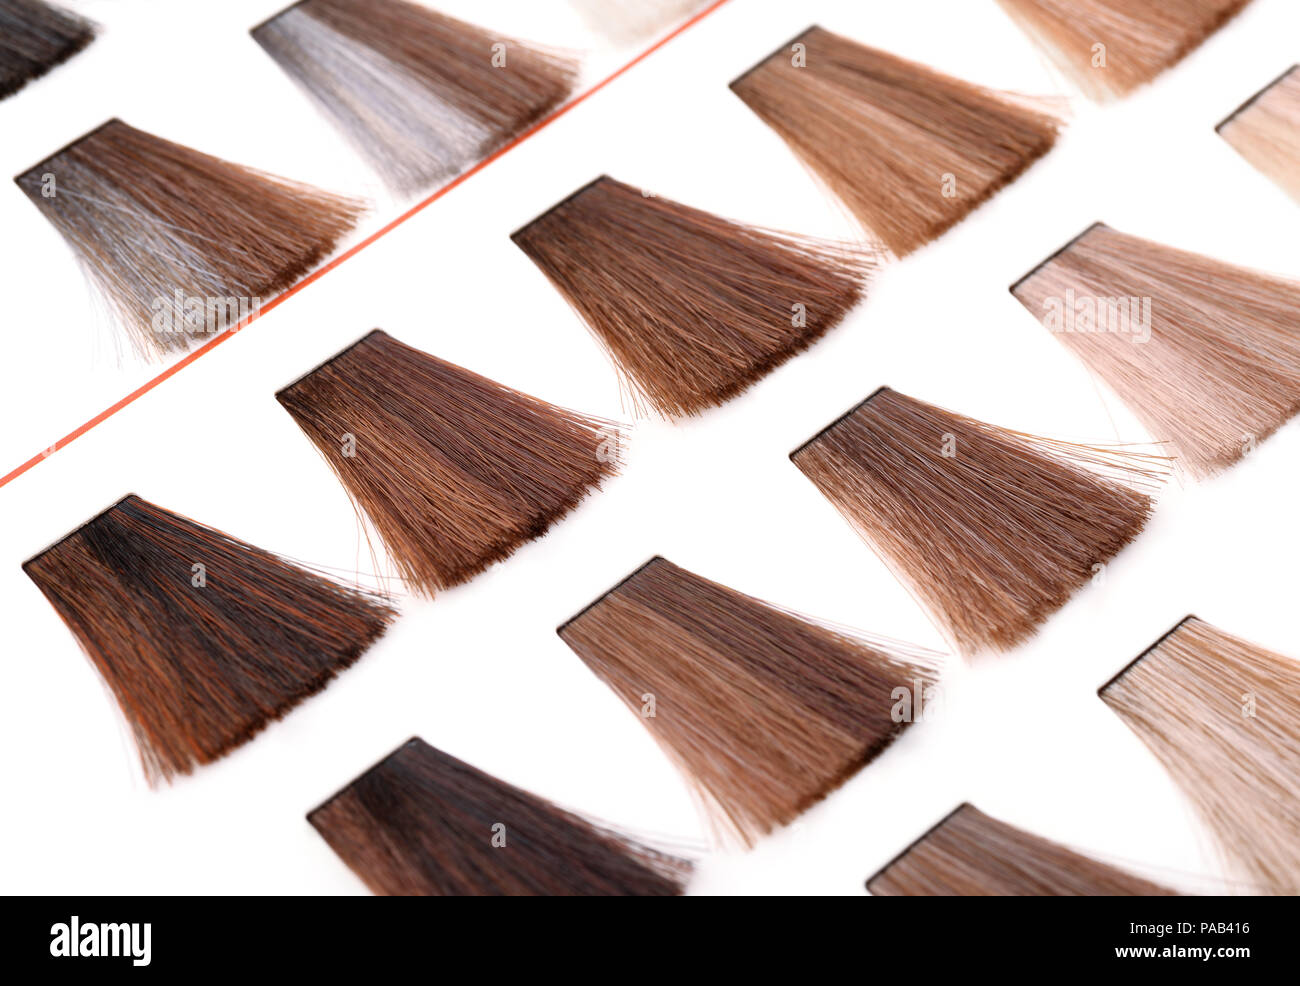 Palette of hair color dye samples isolated on white Stock Photo - Alamy